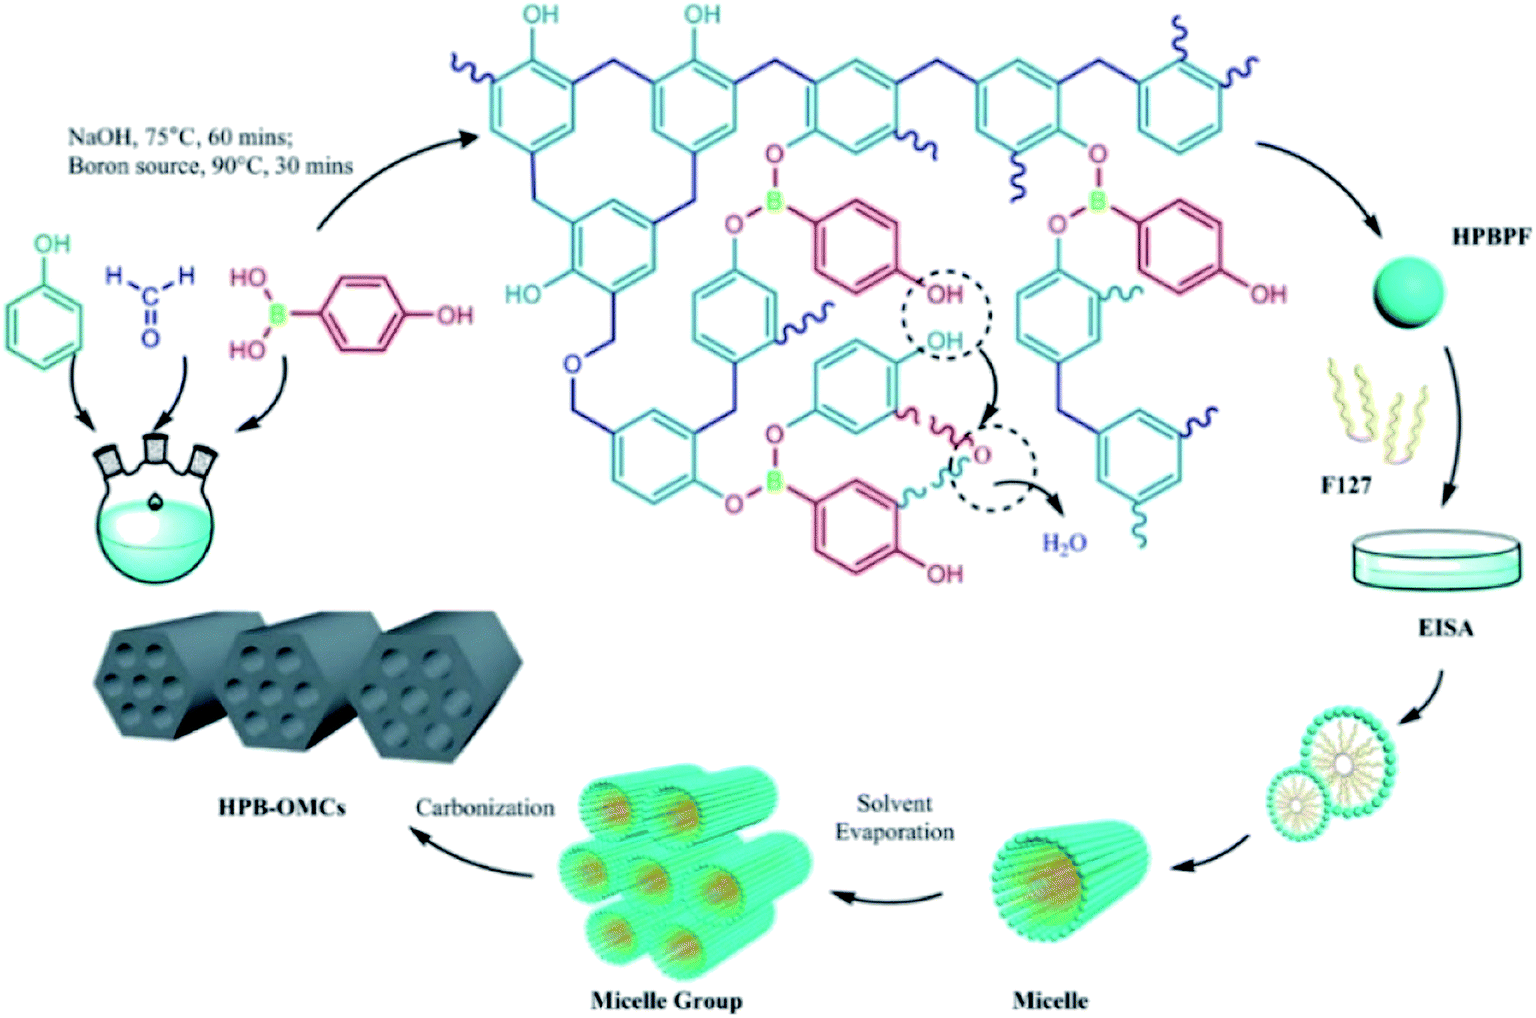 Fabrication of high B-doped ordered mesoporous carbon with  4-hydroxyphenylborate phenolic resin for supercapacitor electrode materials  - RSC Advances (RSC Publishing) DOI:10.1039/D0RA00561D